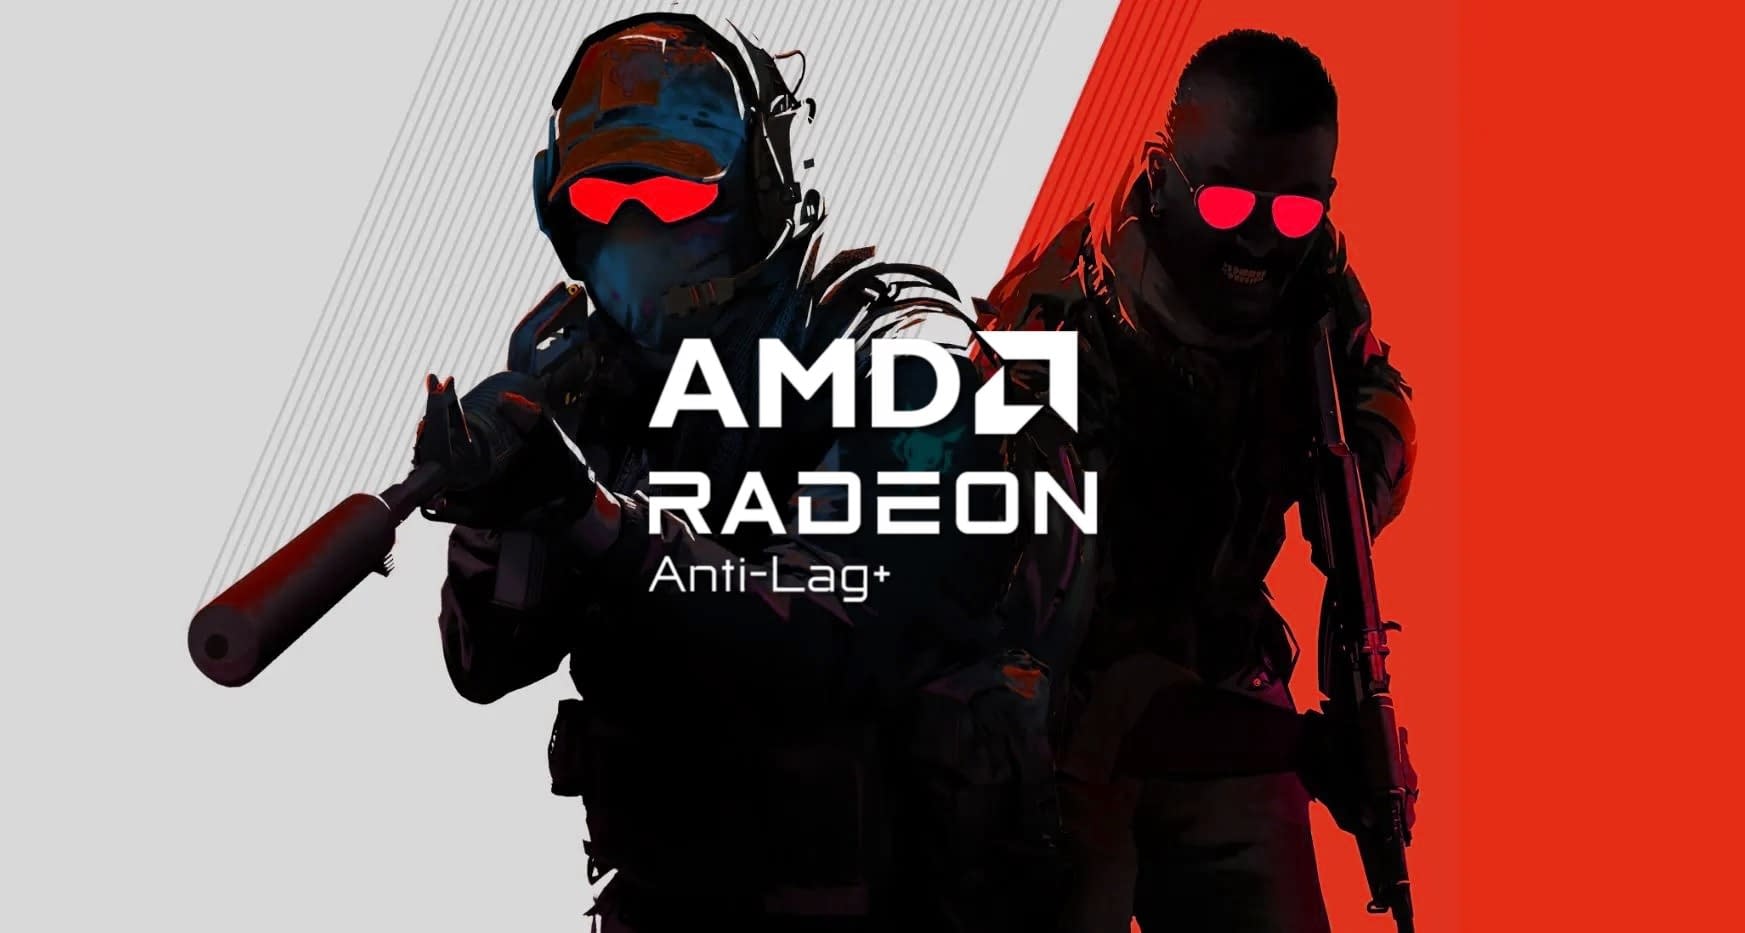 Amd’s Anti-Lag+ Feature Bans Prohibited From Counter Strike 2